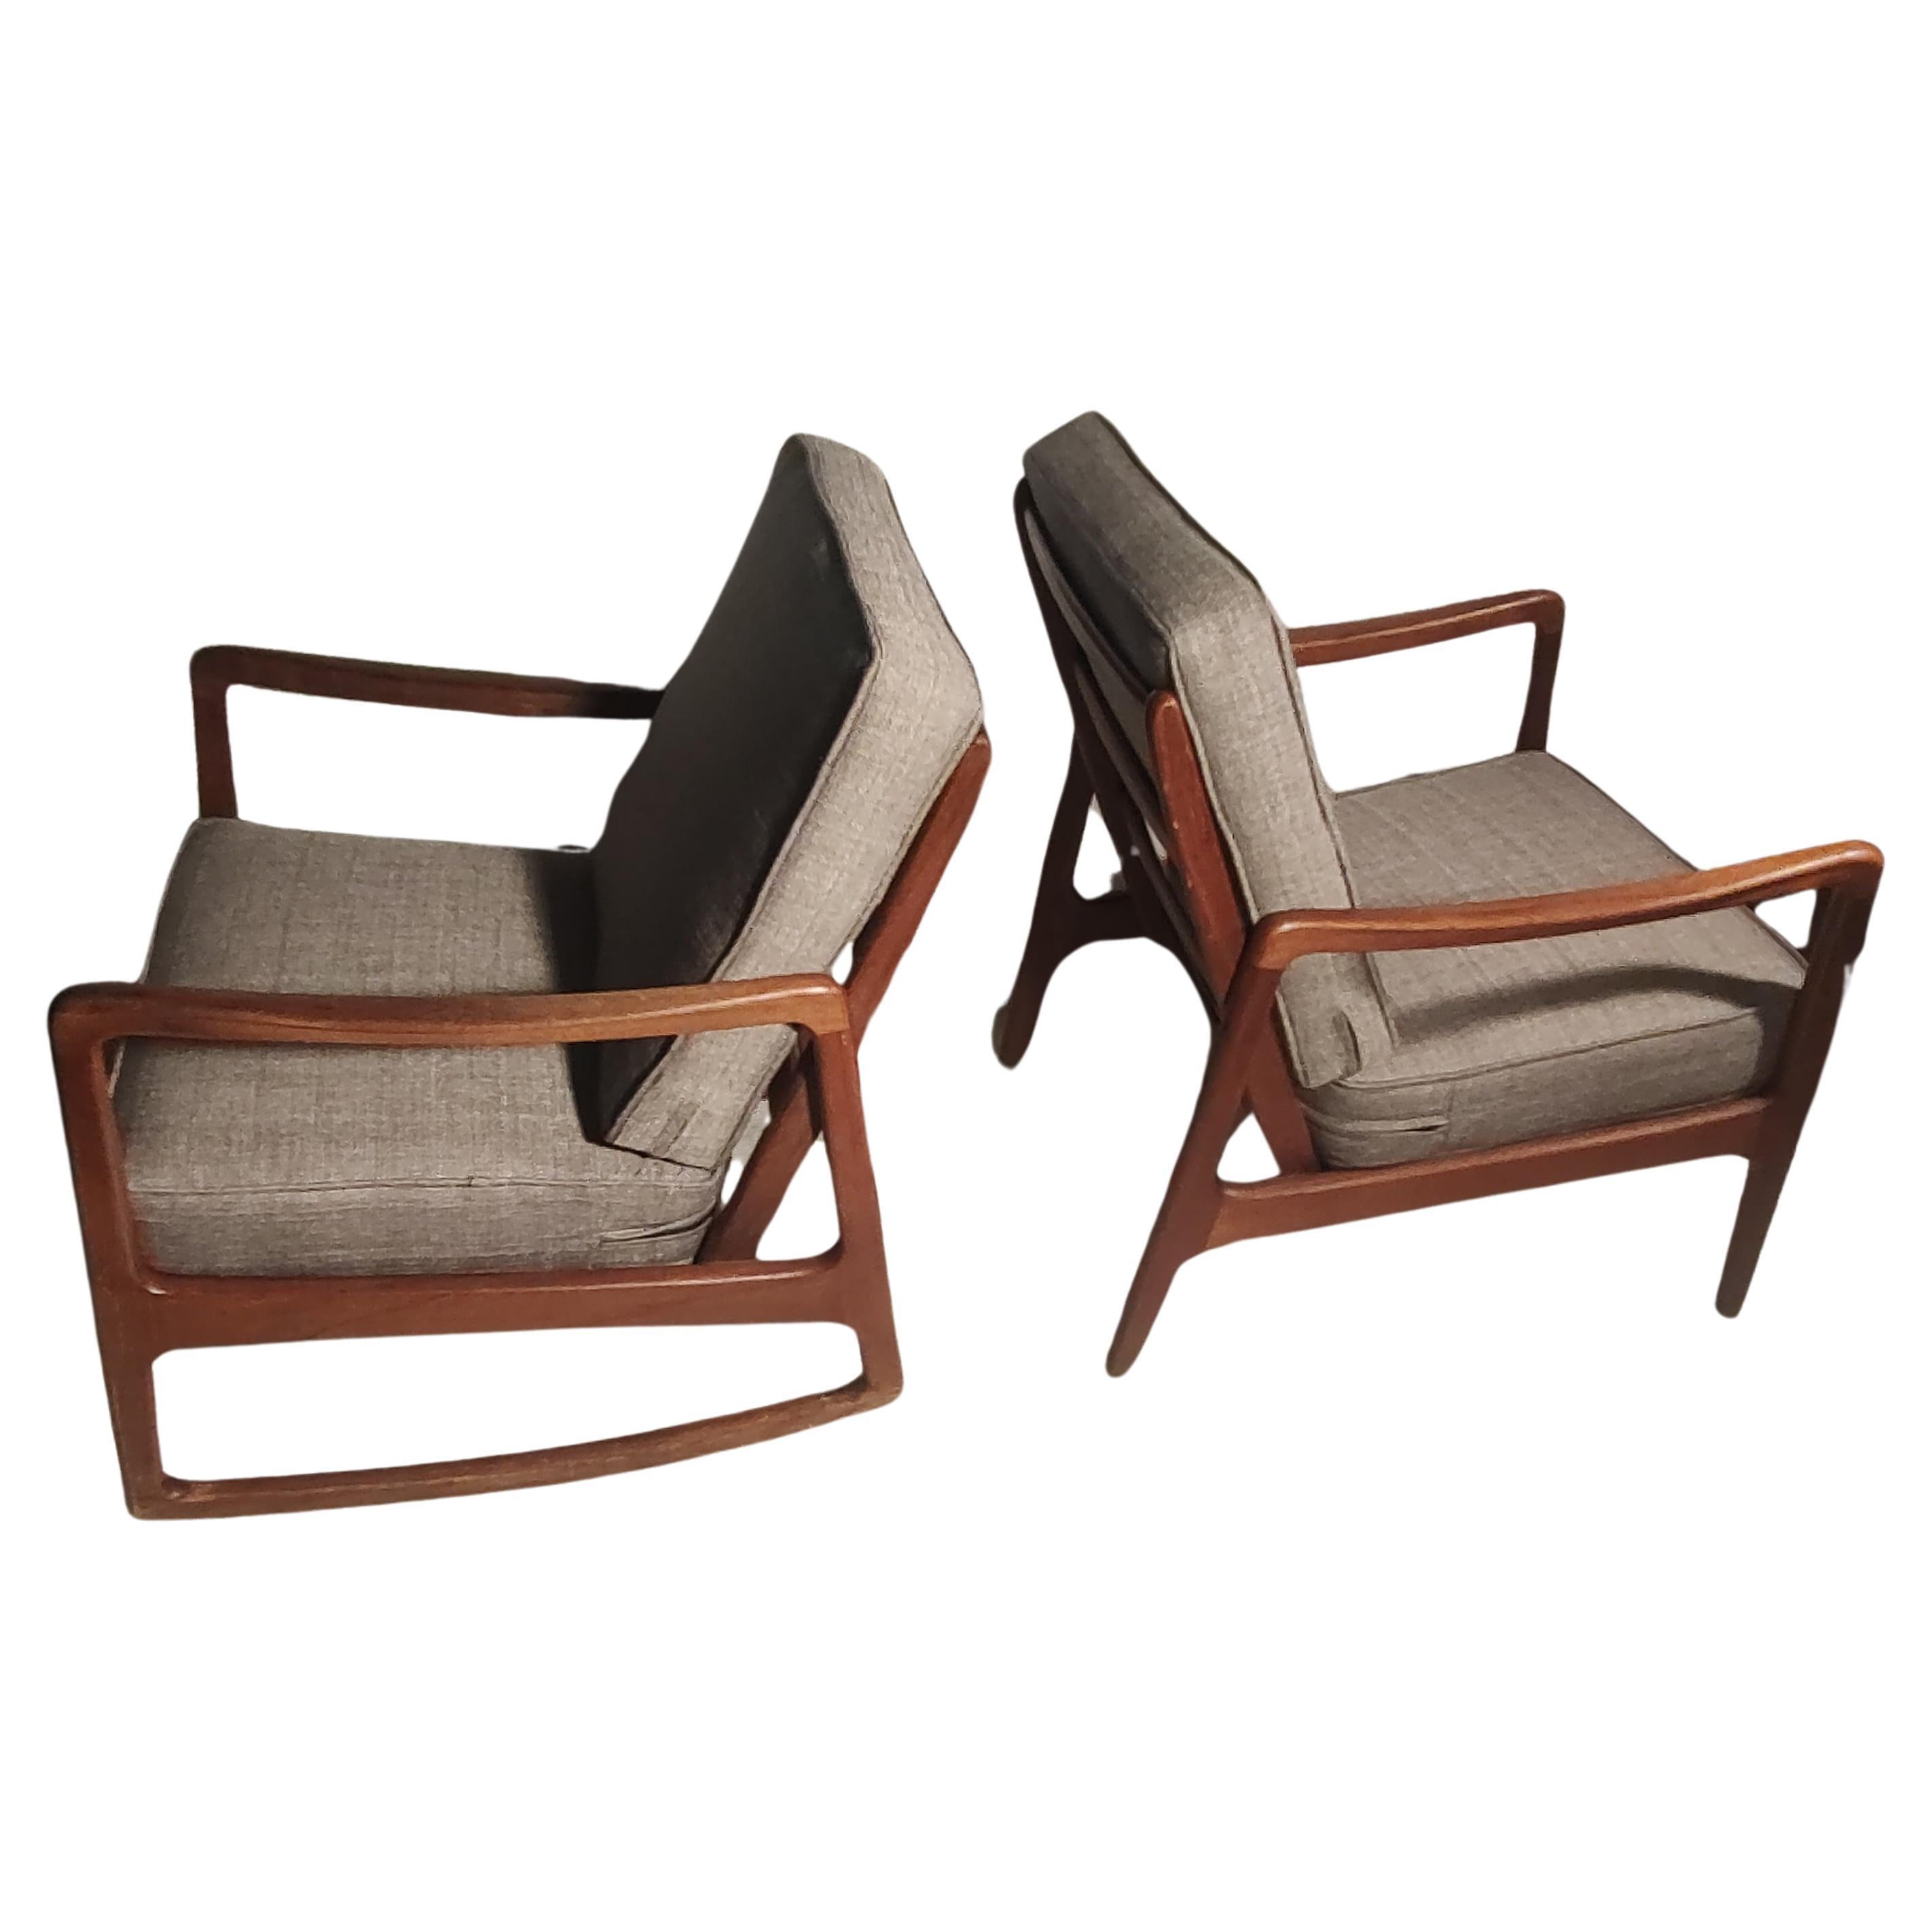 Mid Century Modern Teak Lounge Chair & Rocking Chair Set by John Stuart  In Good Condition For Sale In Port Jervis, NY